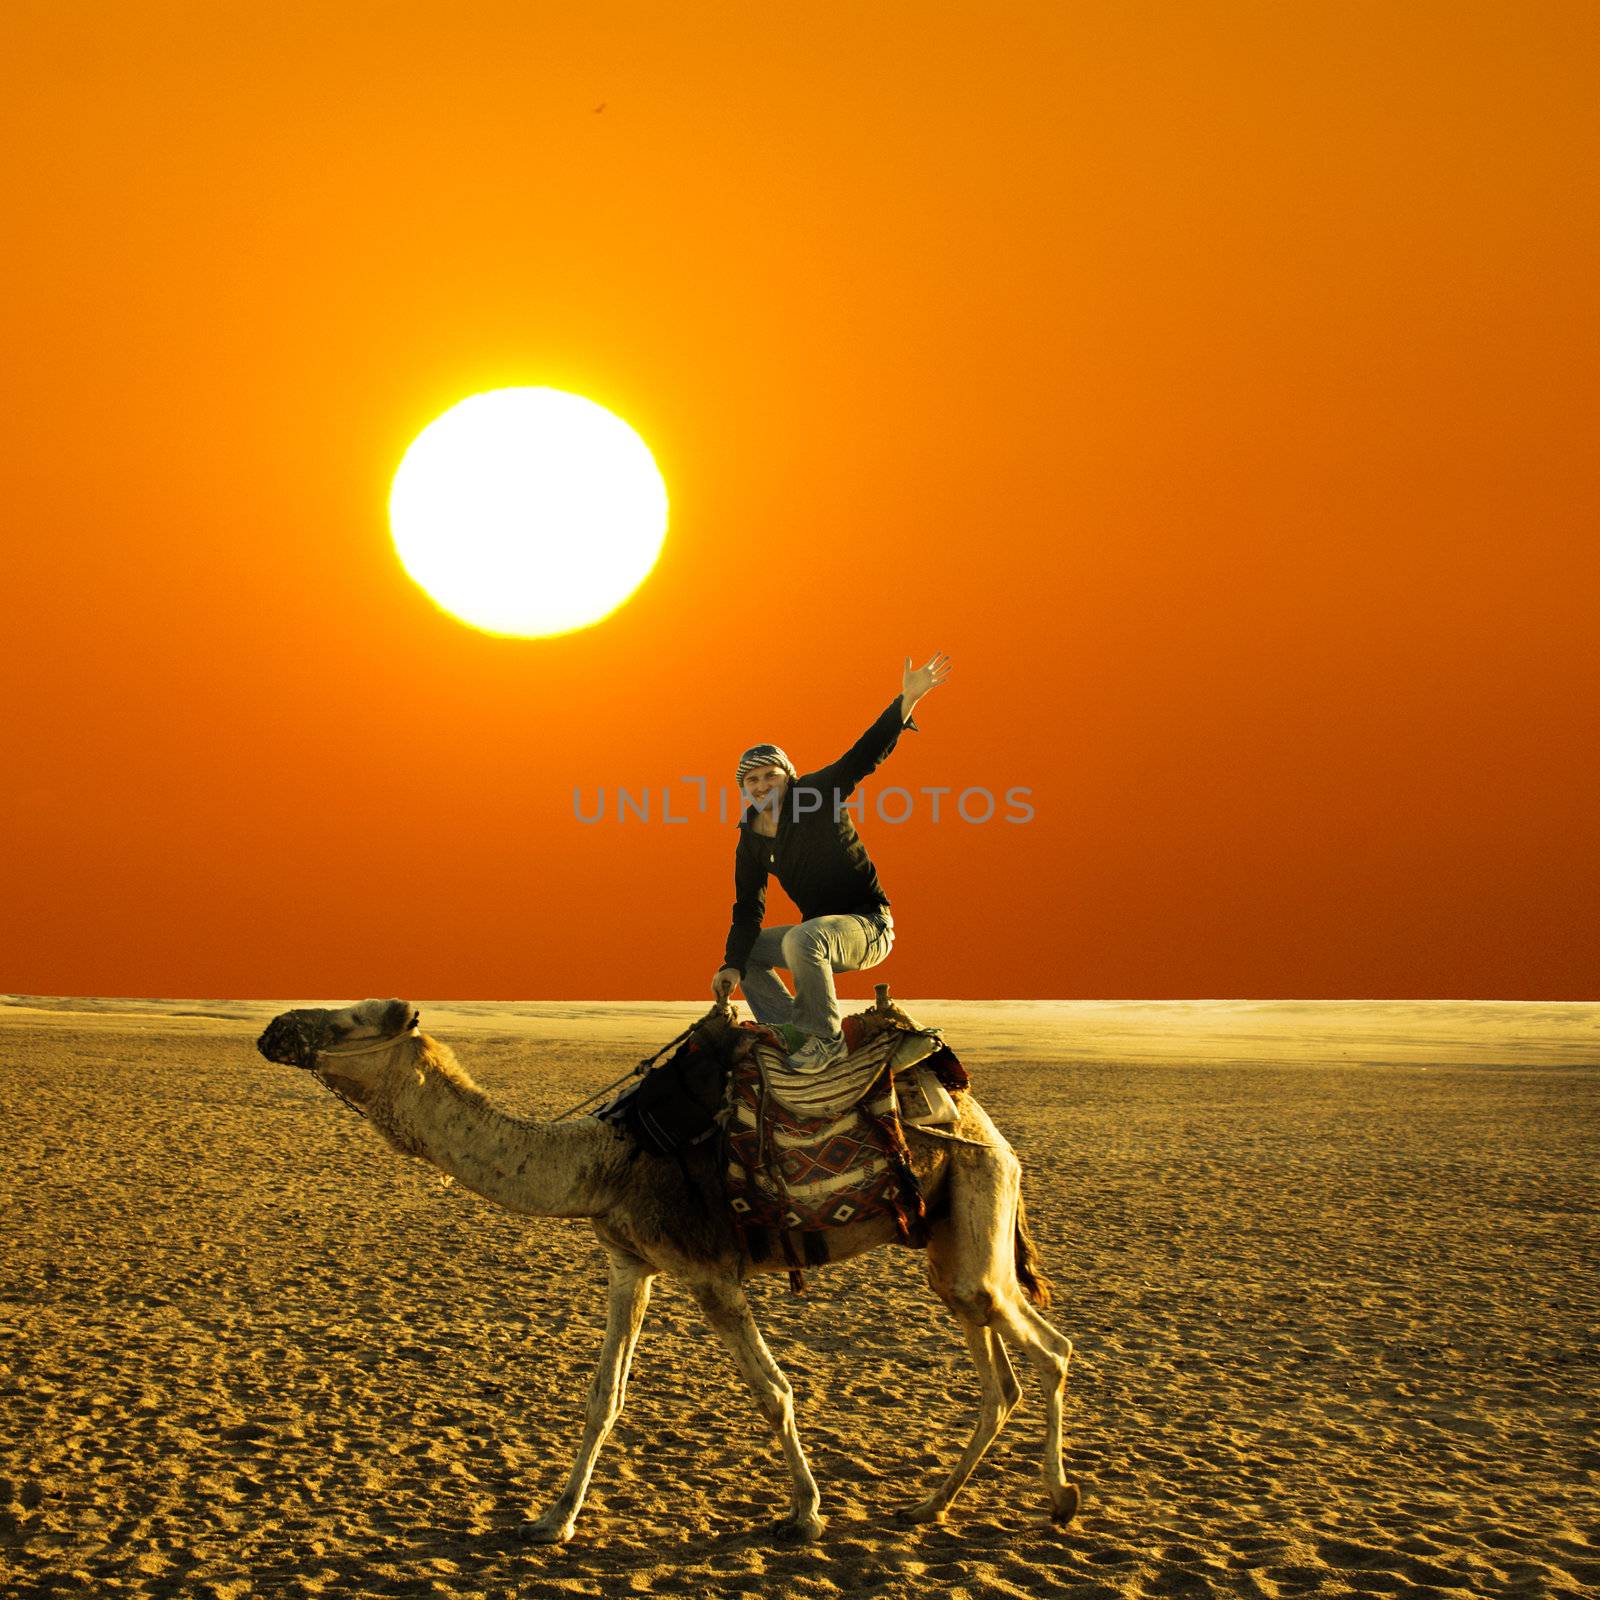 pose on the camel by photochecker